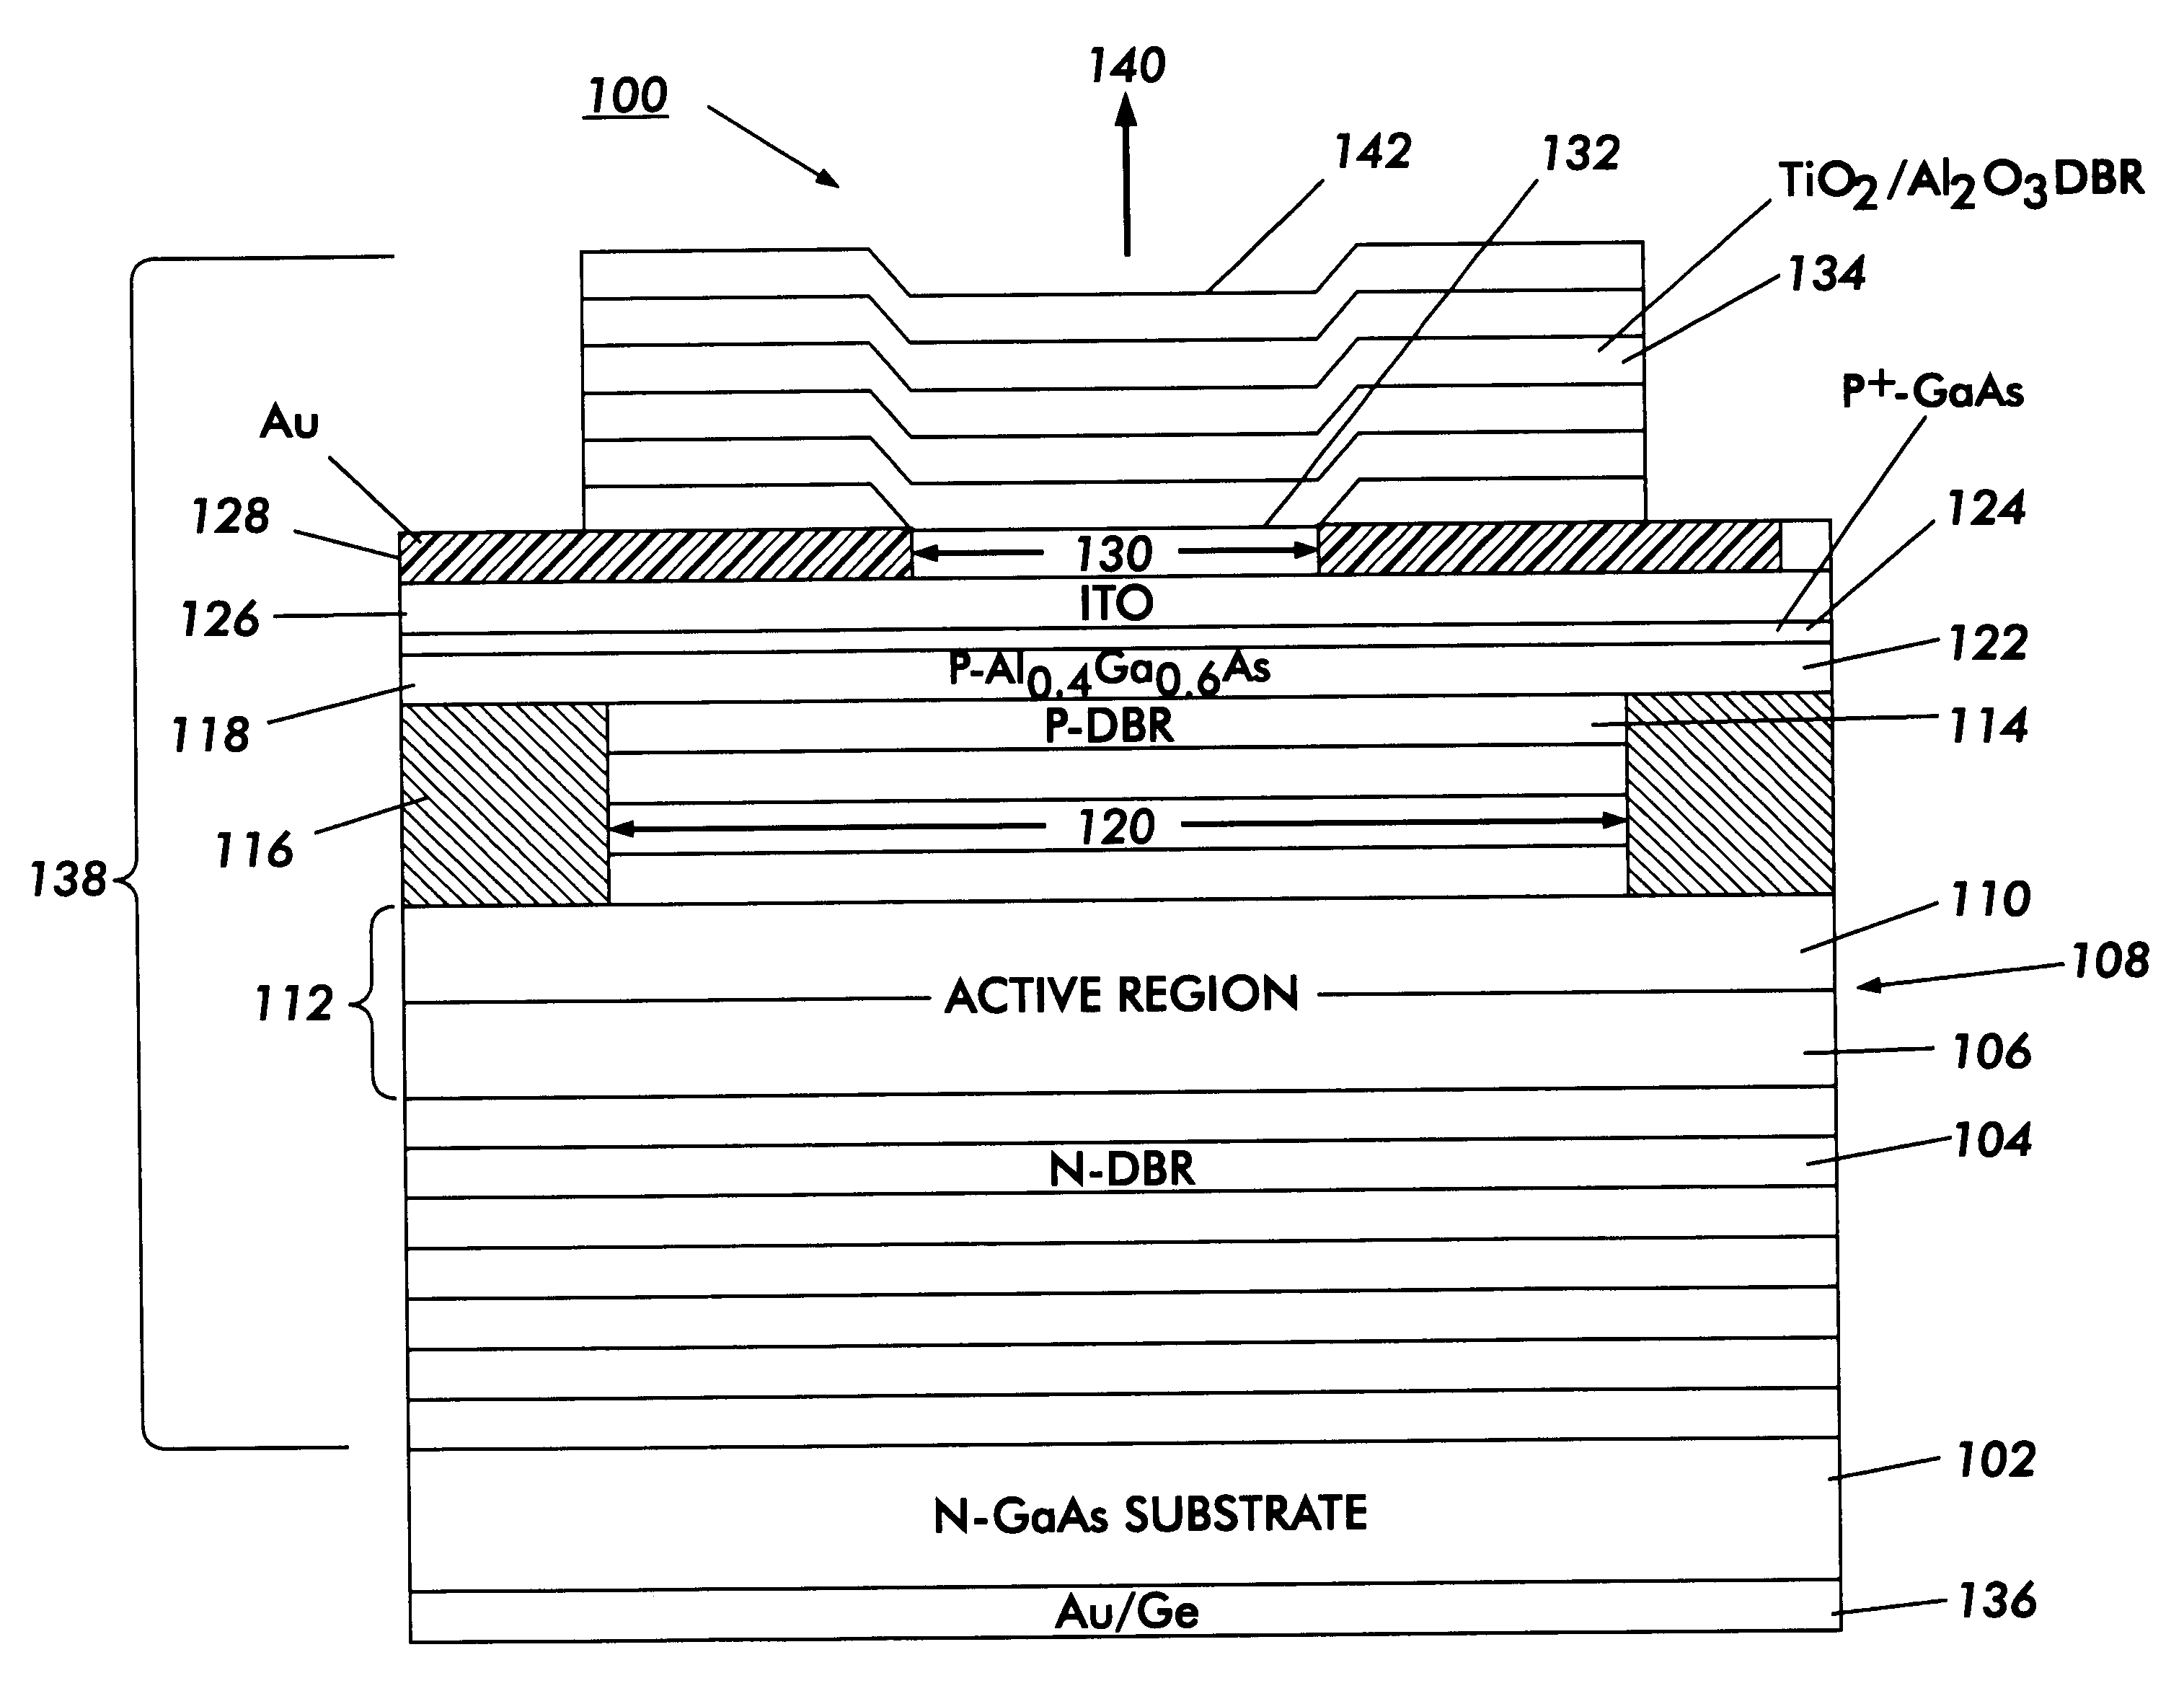 Metal spatial filter to enhance model reflectivity in a vertical cavity surface emitting laser